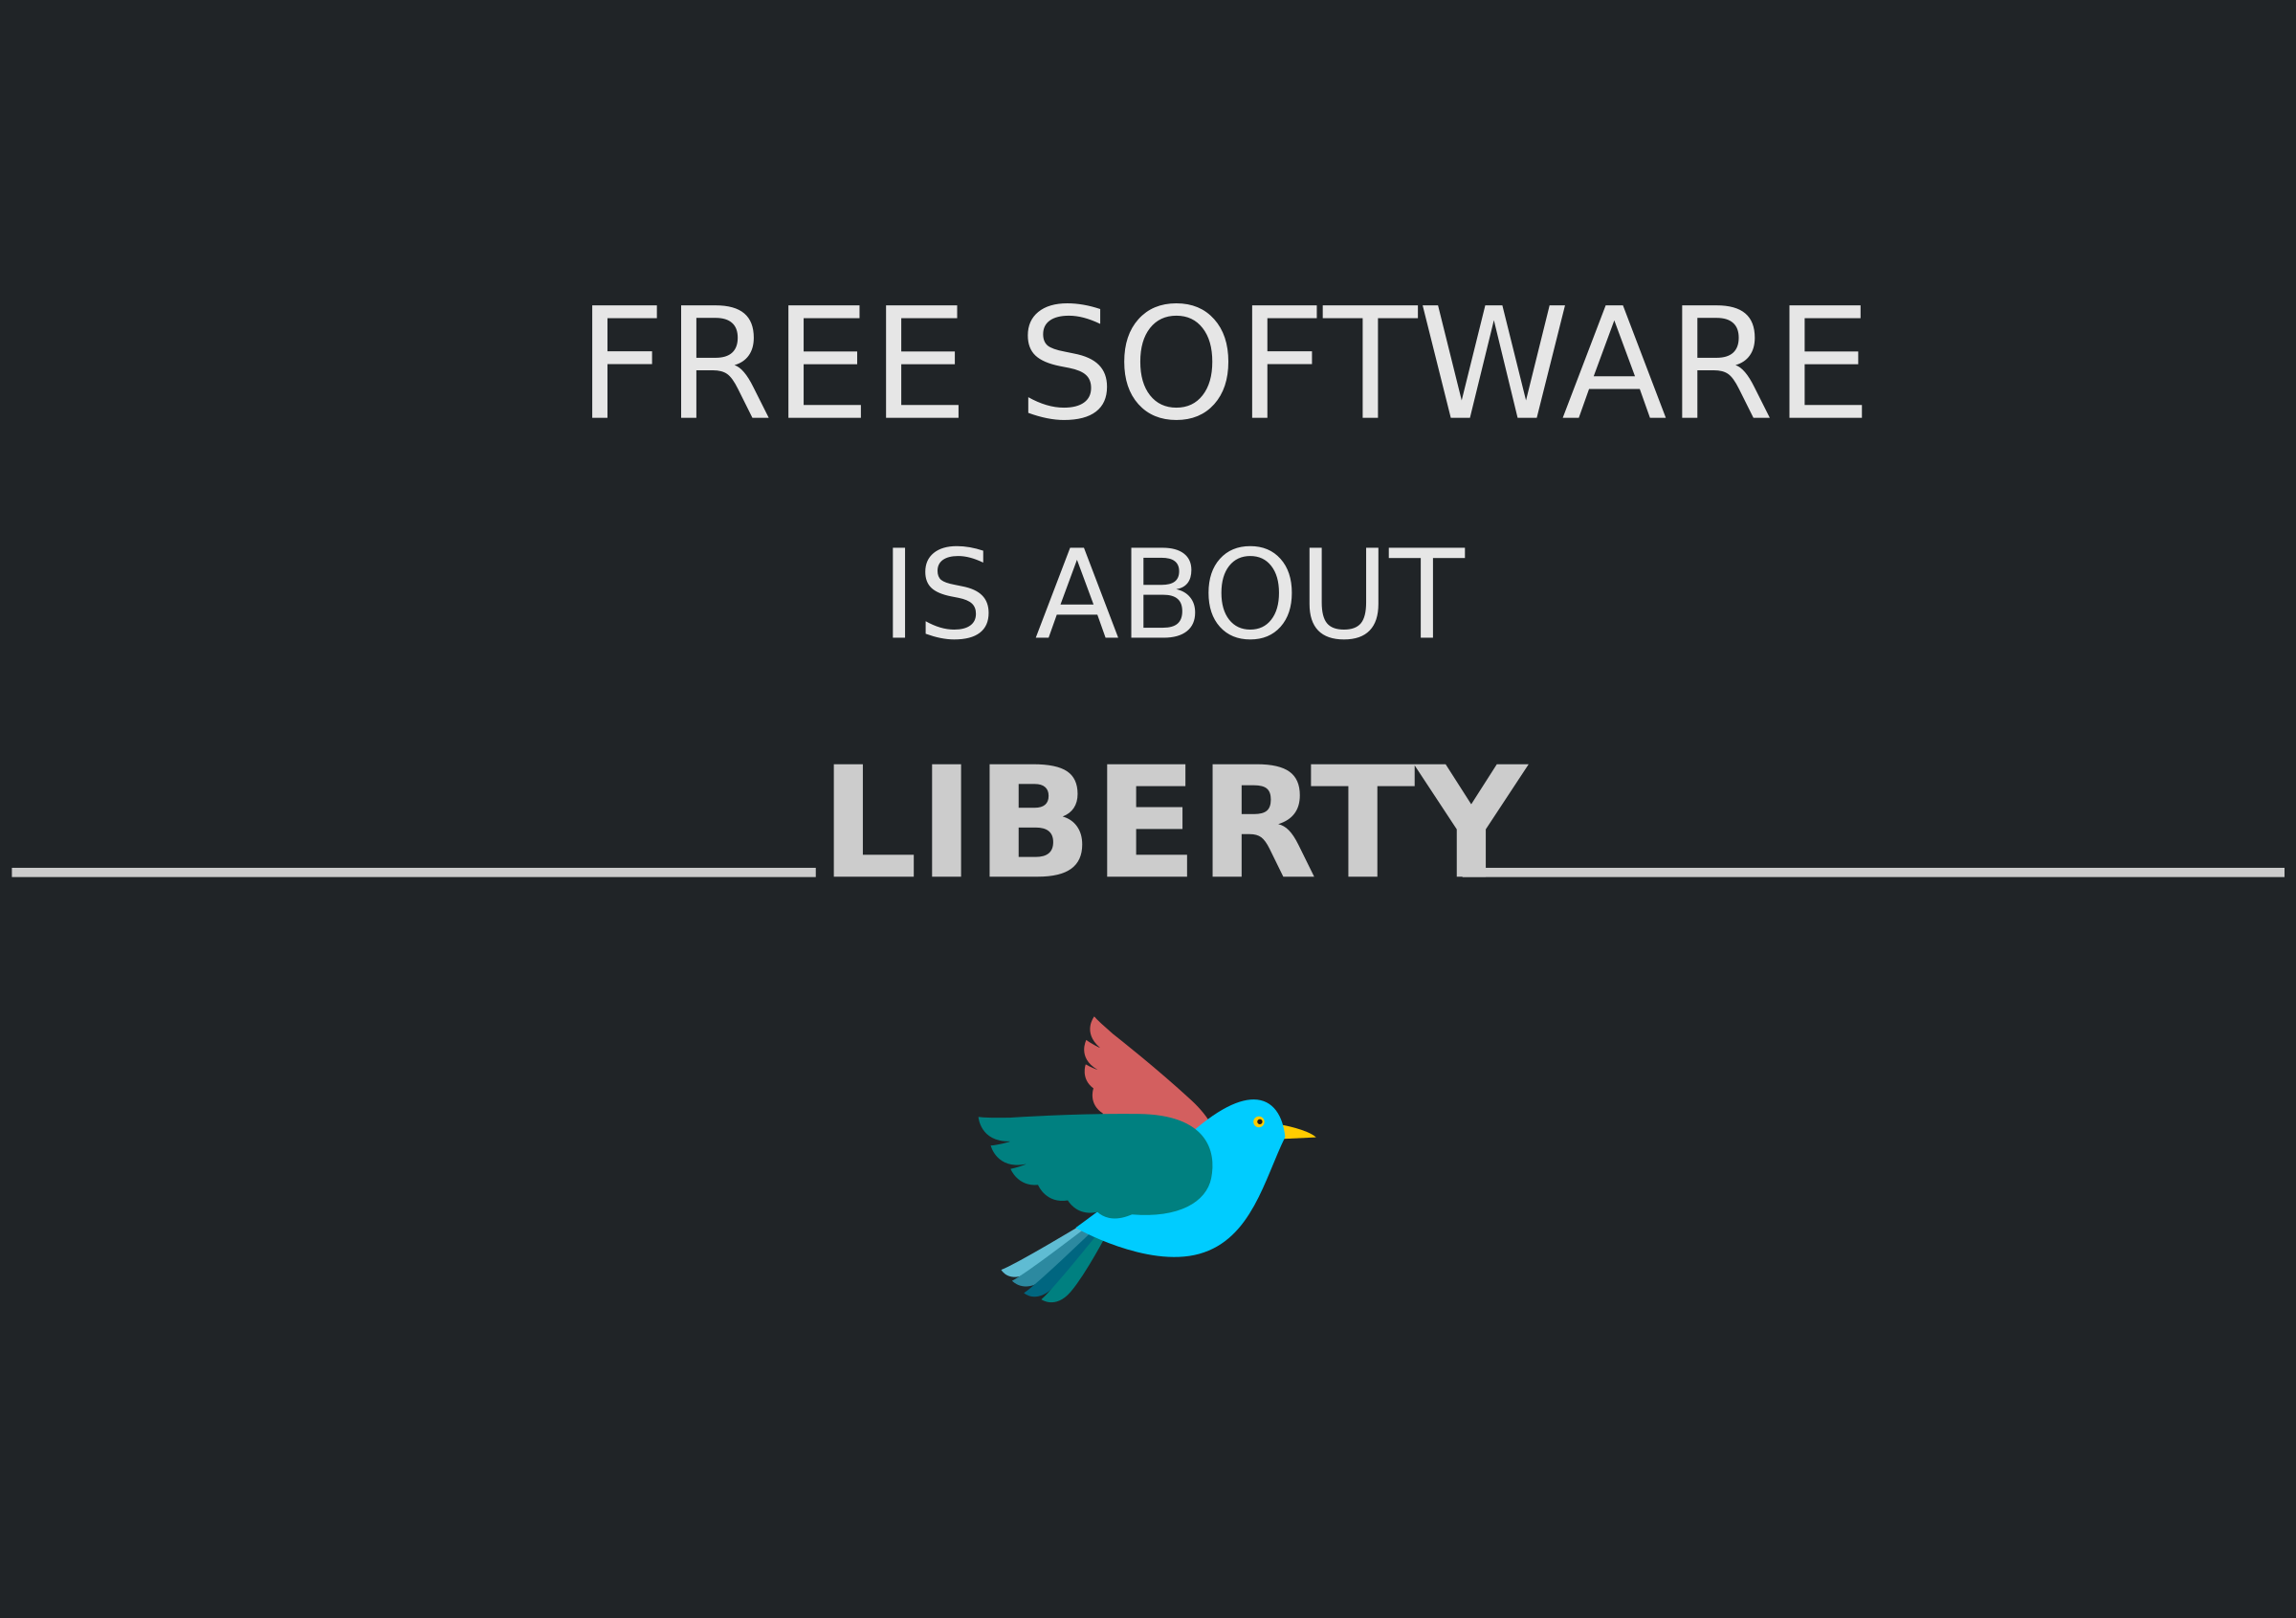 FREE SOFTWARE